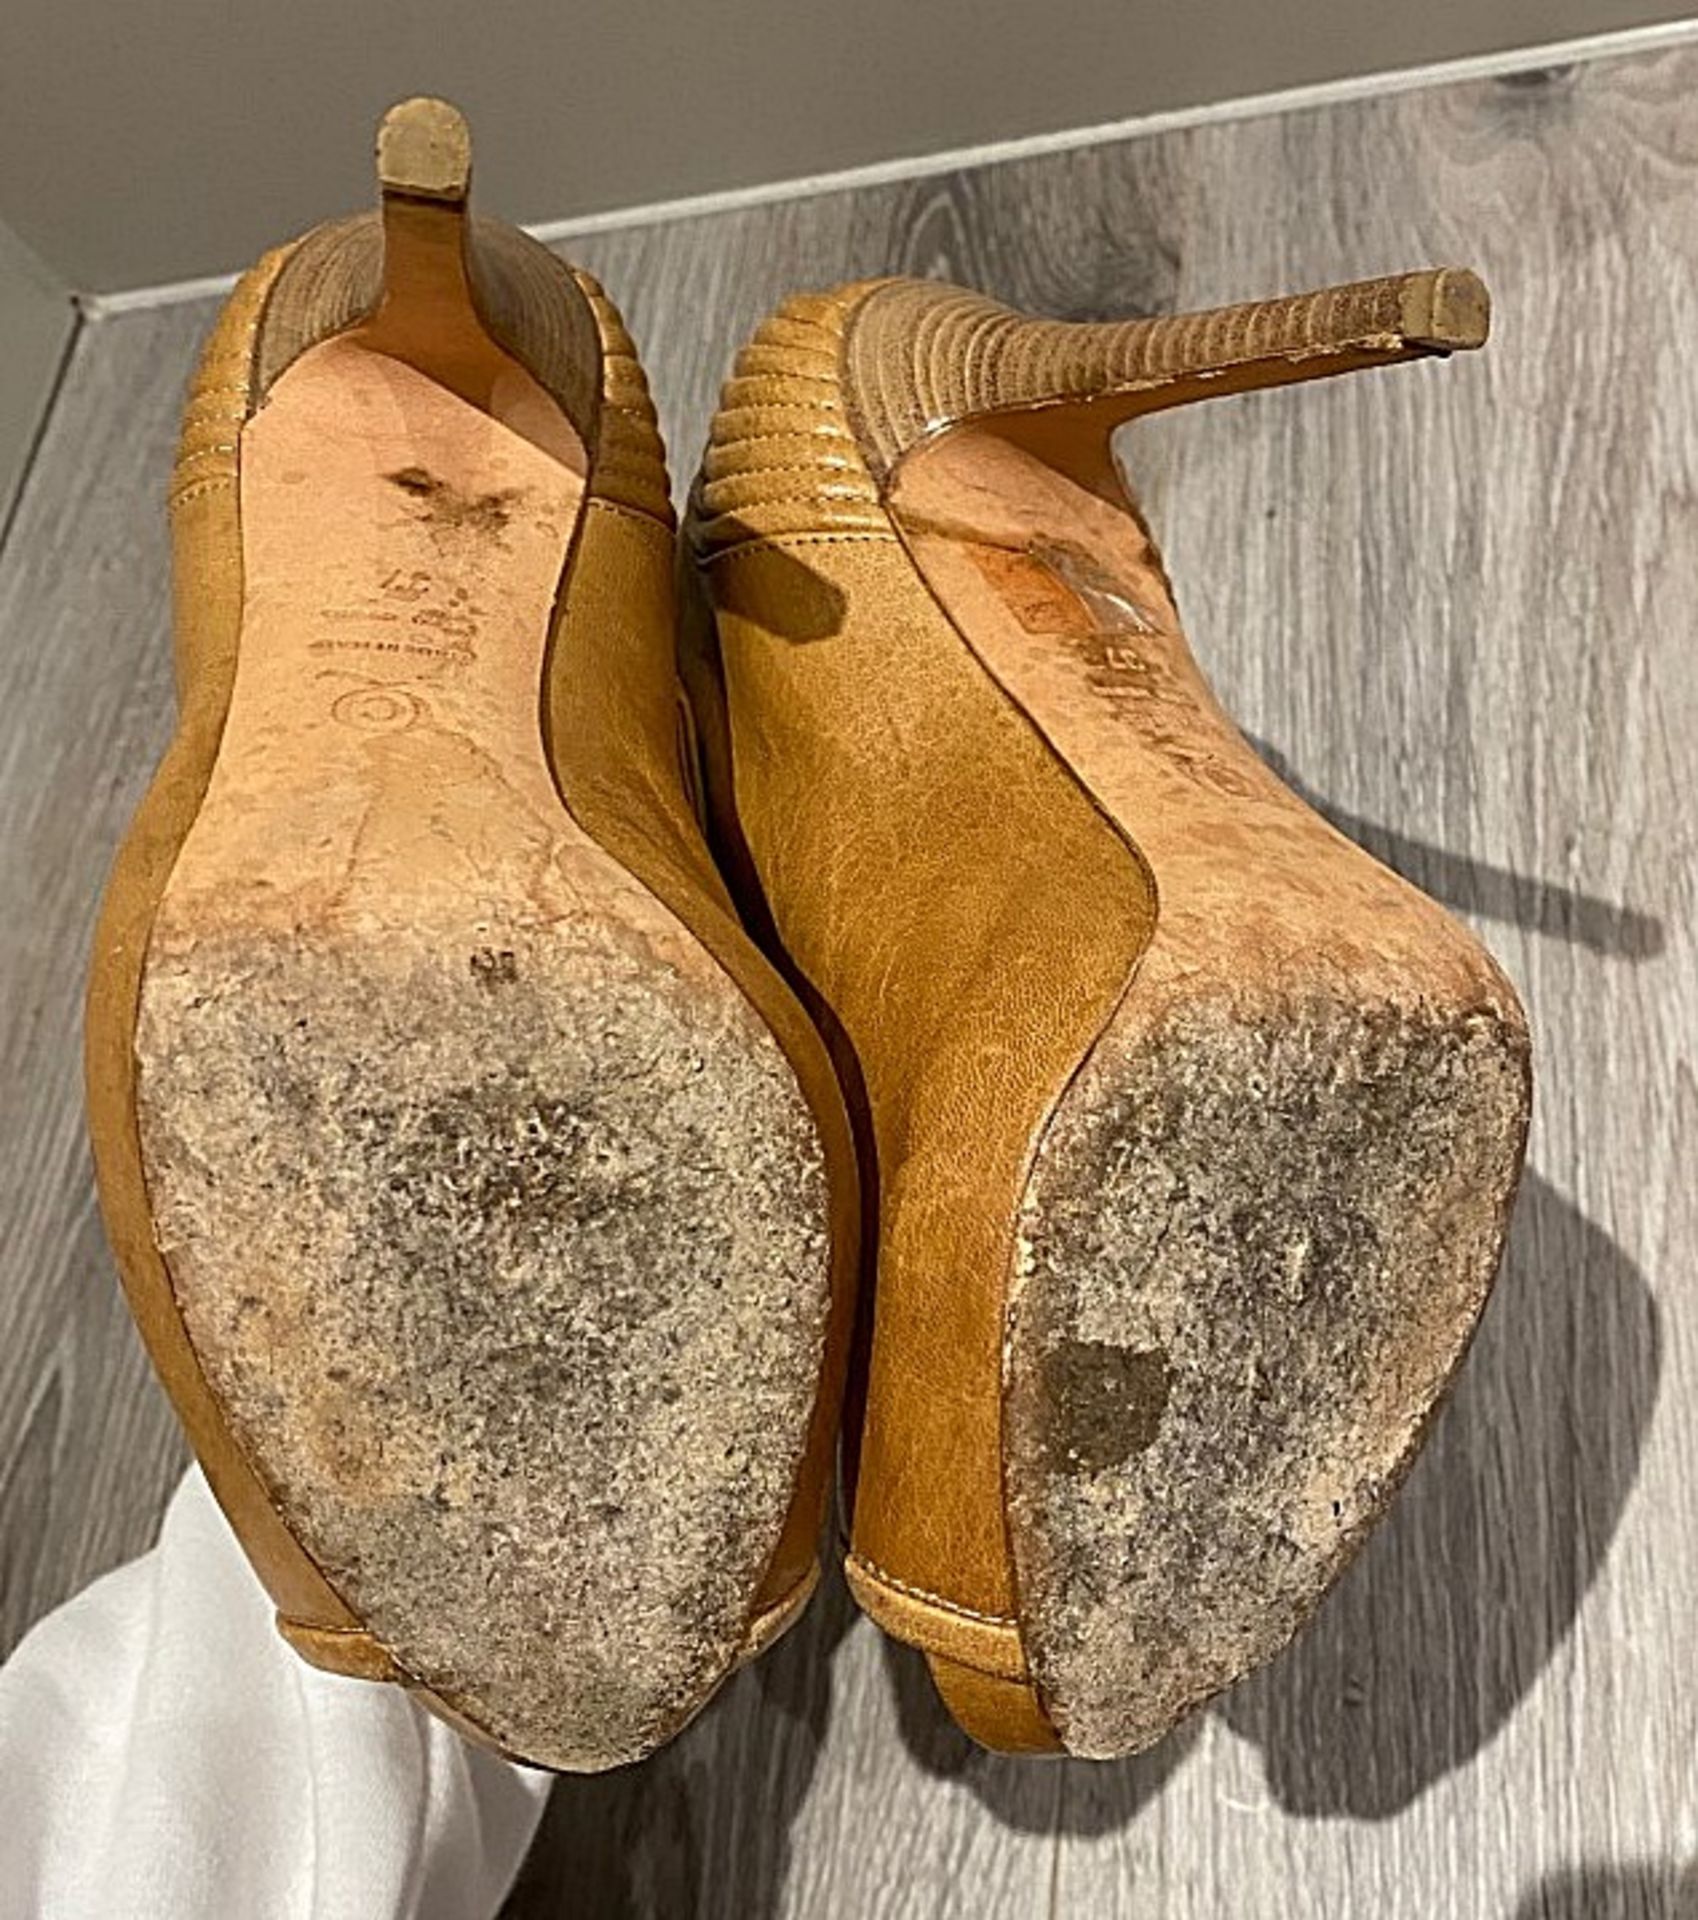 1 x Pair Of Genuine Alexander Mcqueen High Heel Shoes In Tan - Size: 37 - Preowned in Very Good - Image 3 of 4